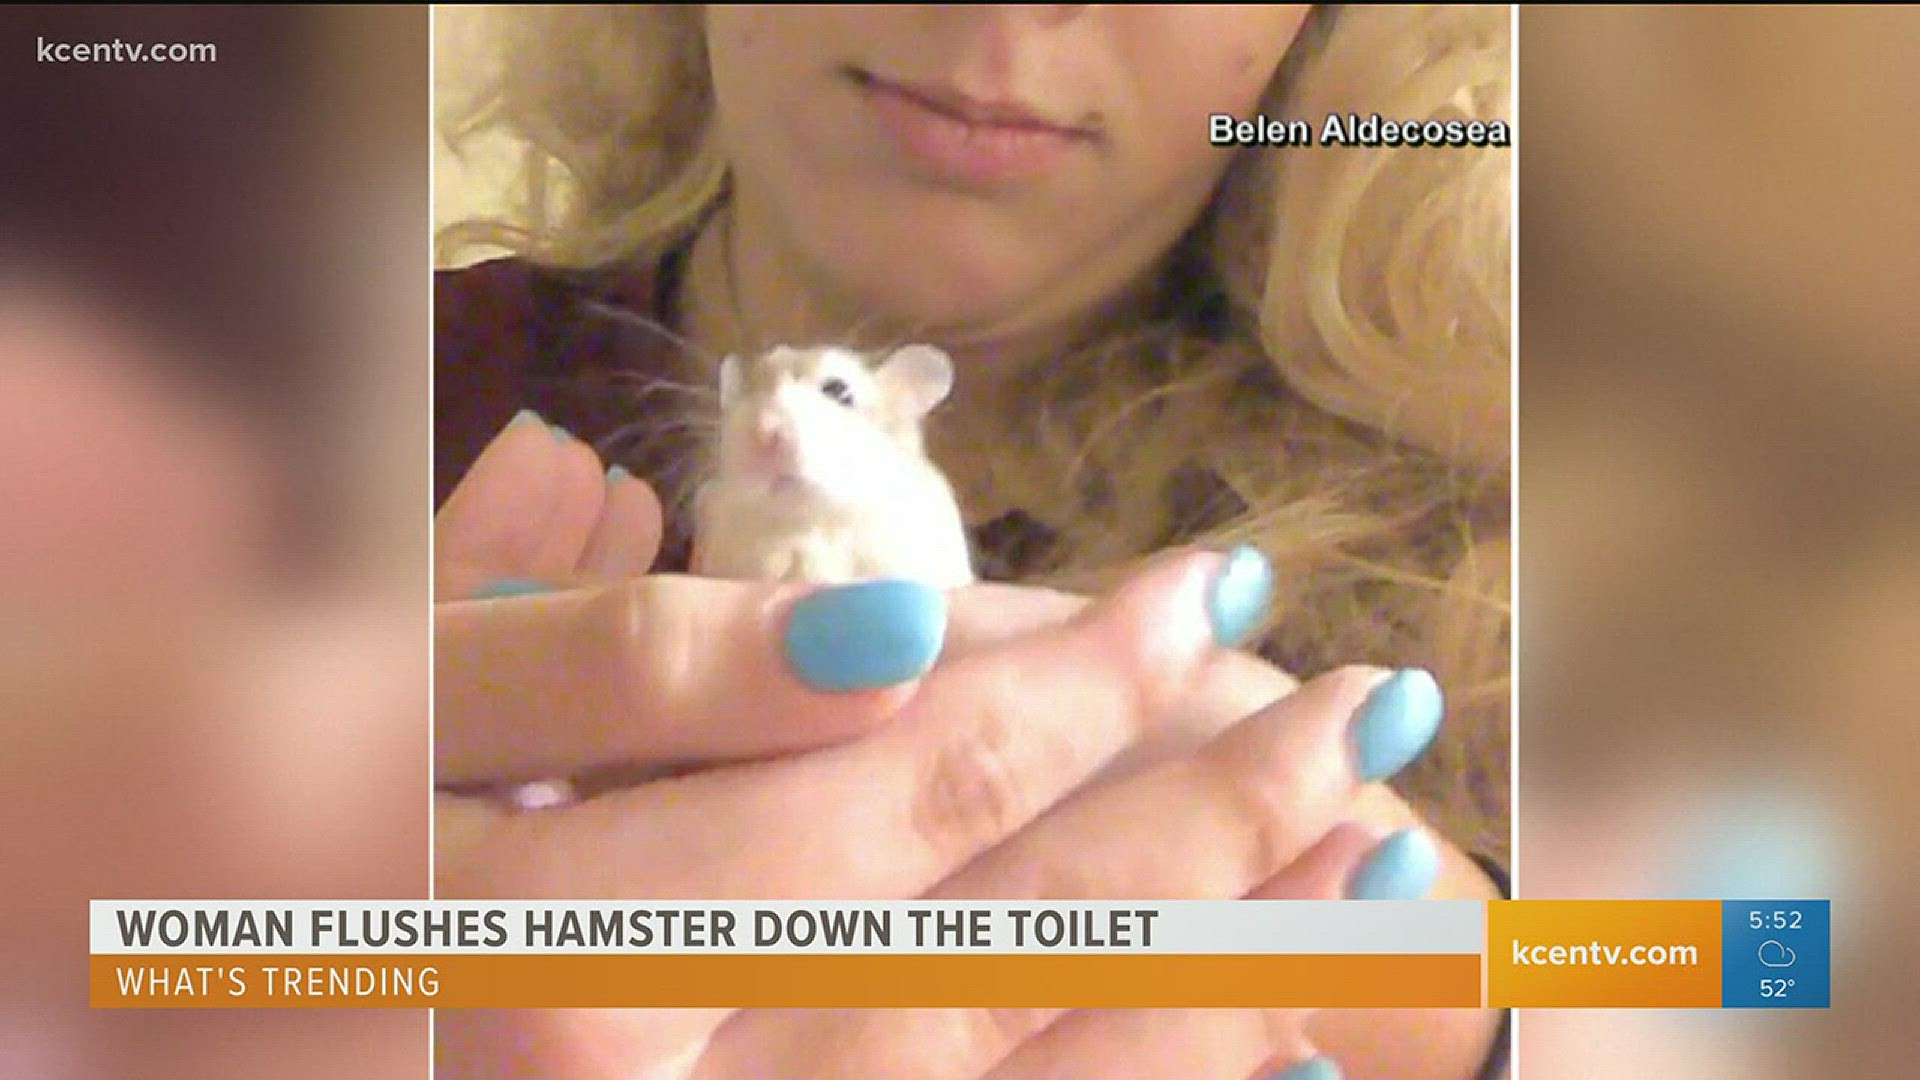 Woman flushes hamster down toilet and boy stuck in toy machine.